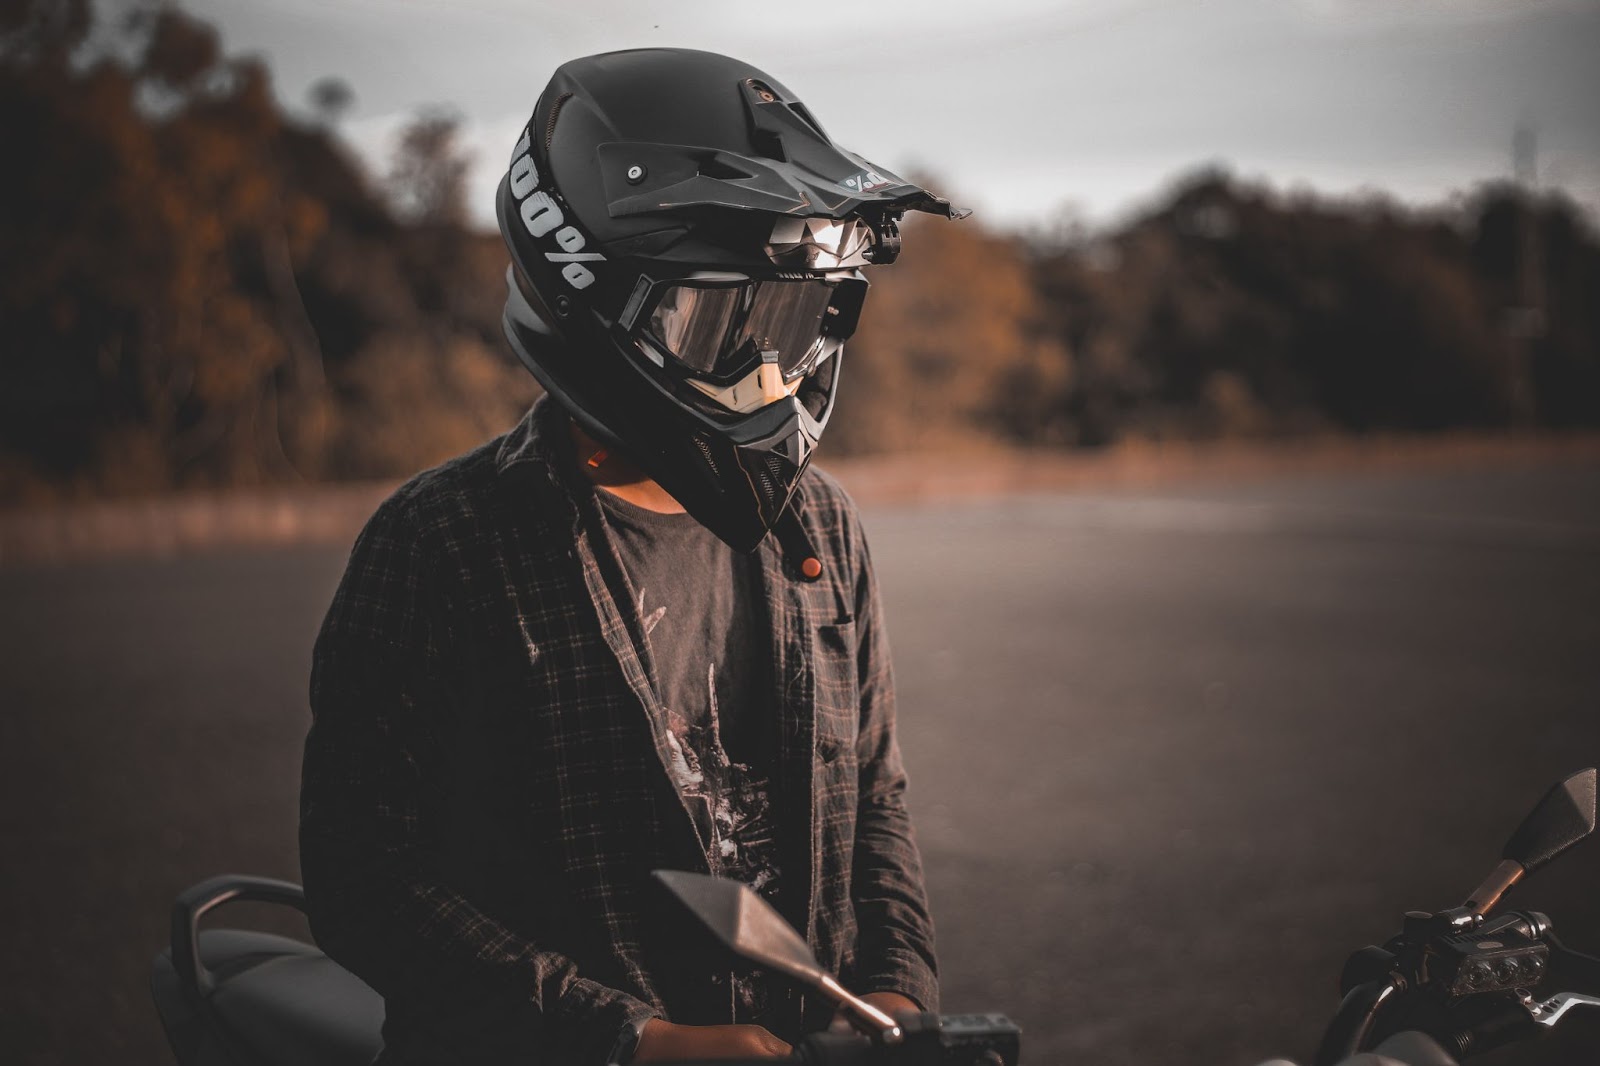 Deadpool Motorcycle Helmet: Unleash Your Inner Merc with a Mouth